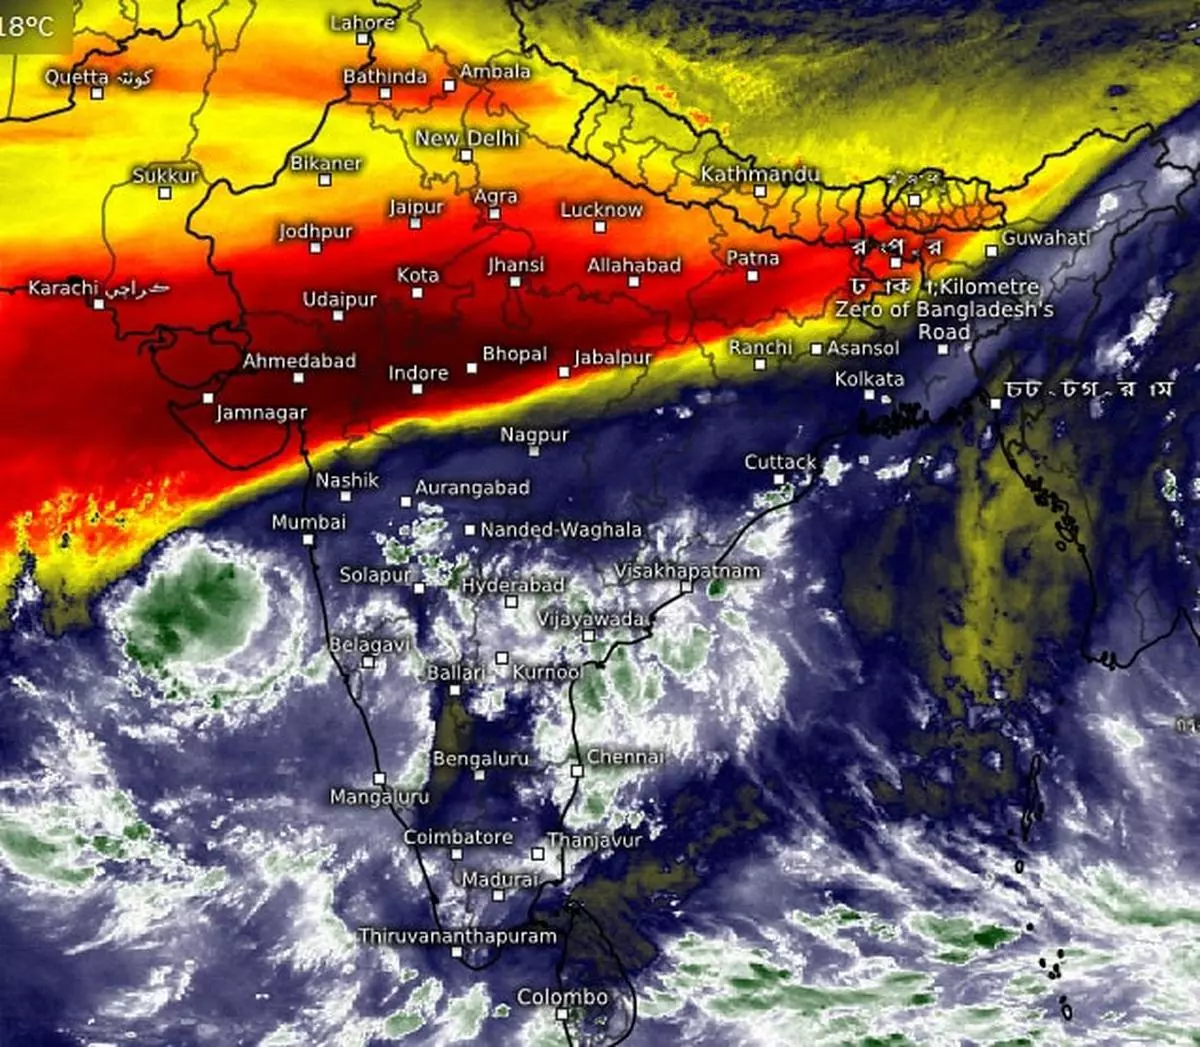 Dry air and cloudless skies prevail over entire Gujarat, half of Madhya Pradesh and Chhattisgarh, entire Jharkhand and Bihar as the line of withdrawal of the South-West monsoon readies to enter the southern half of the country.